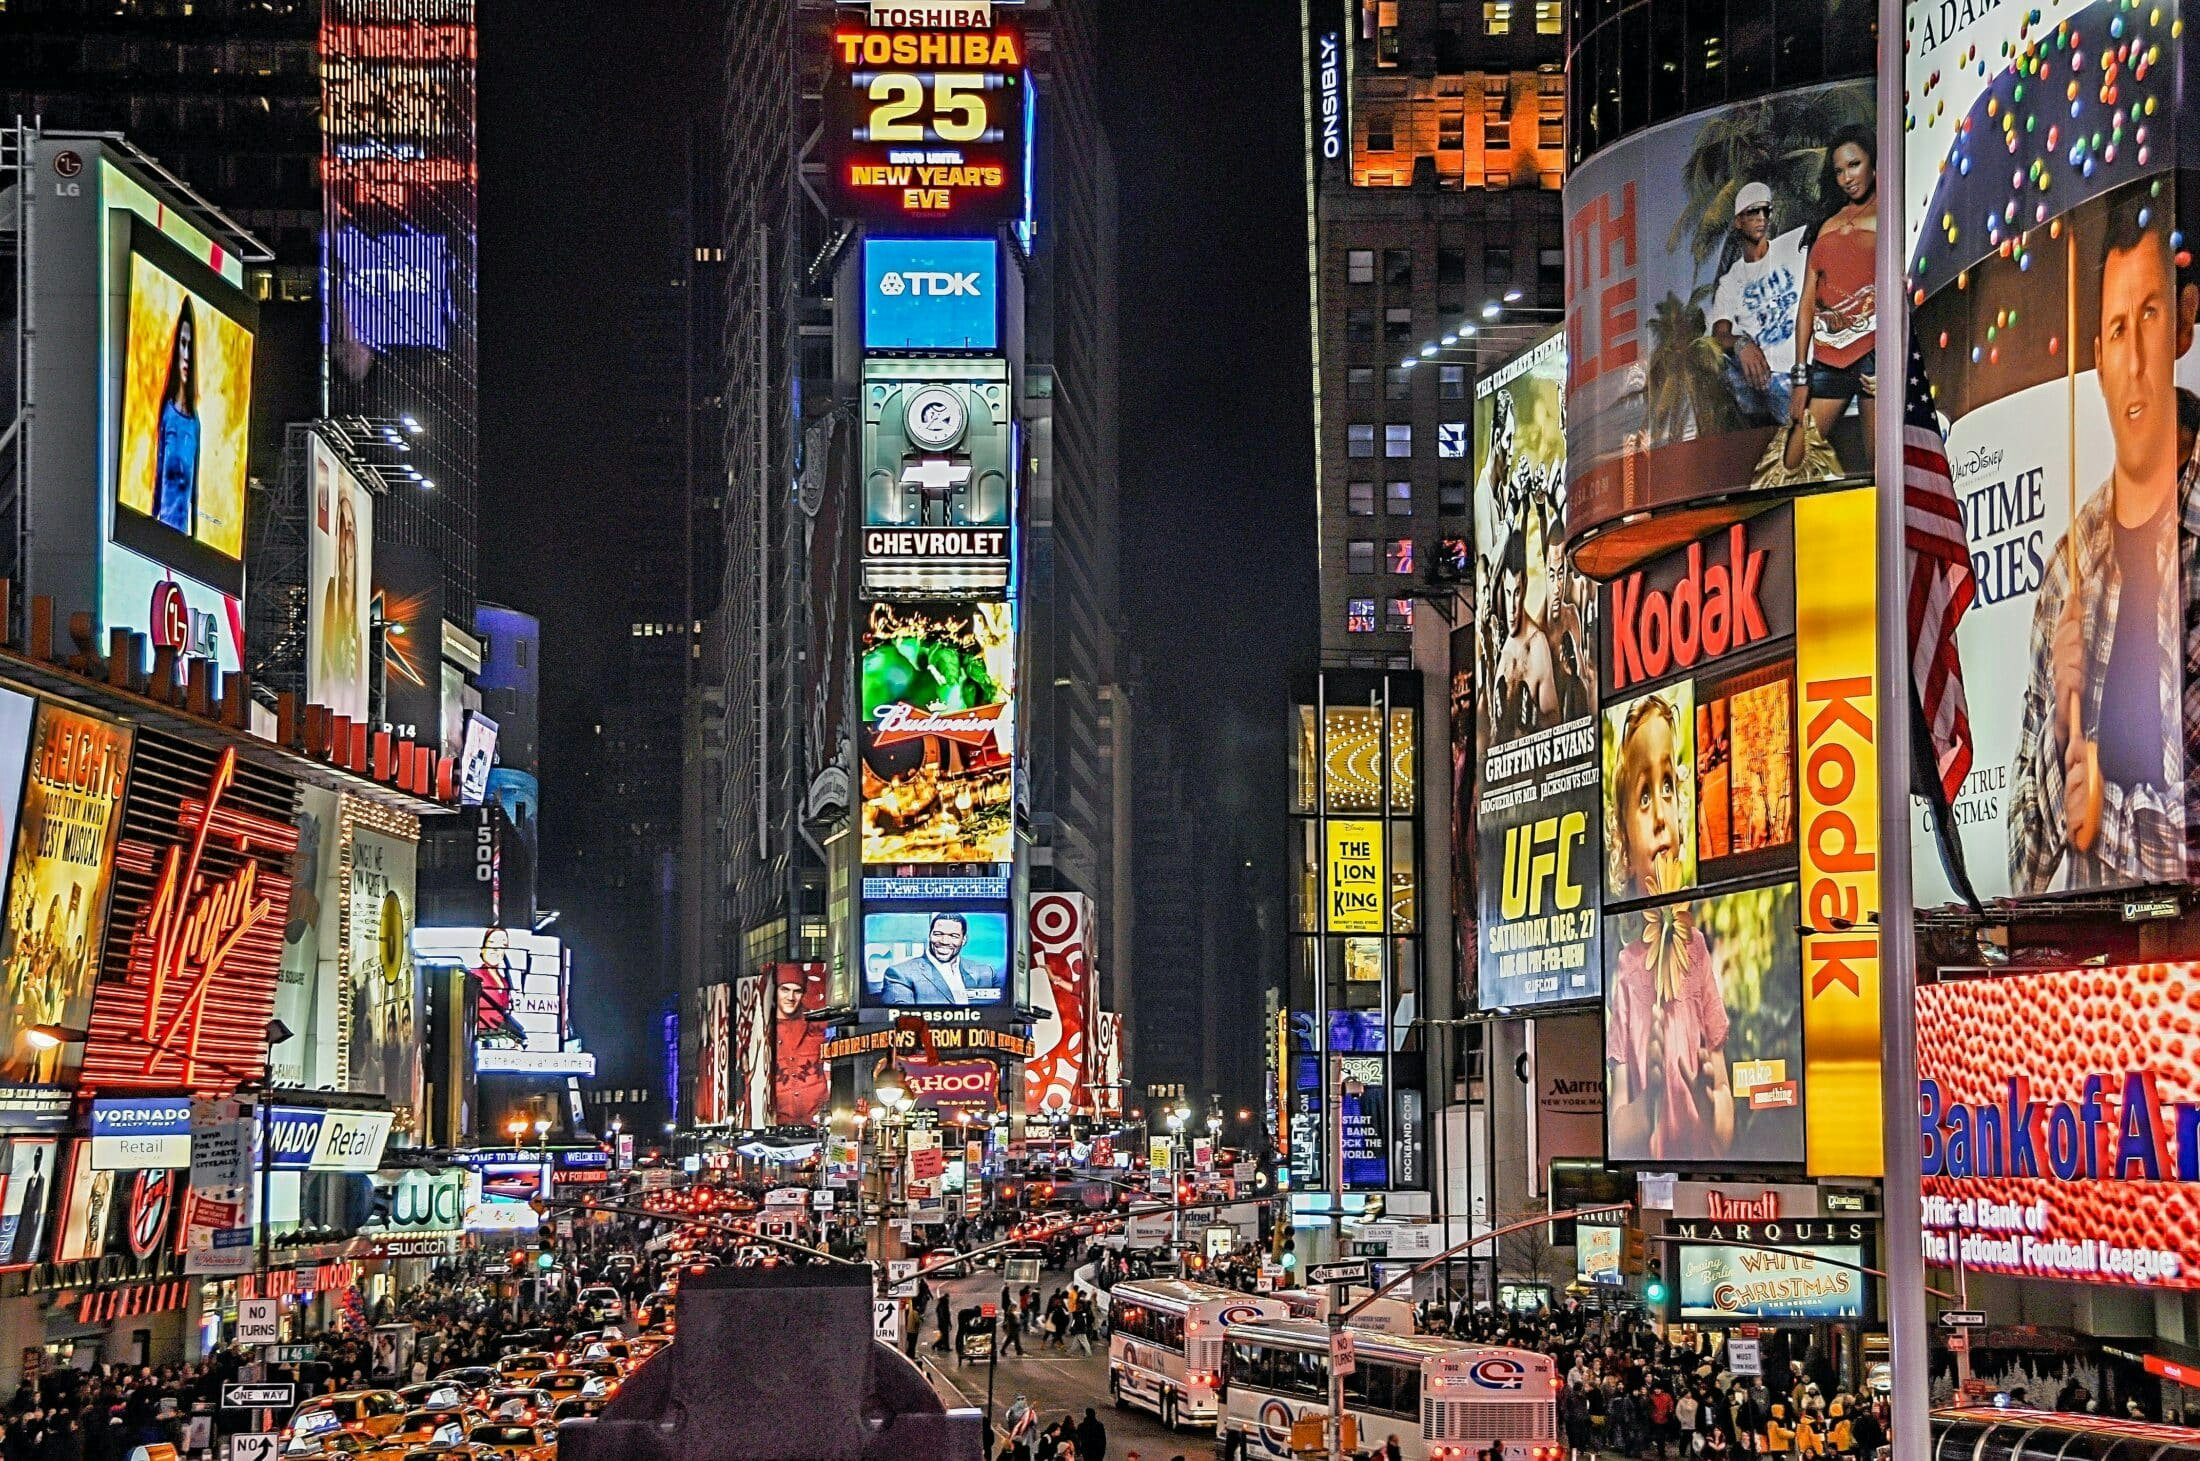 New York City offers plenty of things to do in times square for free.